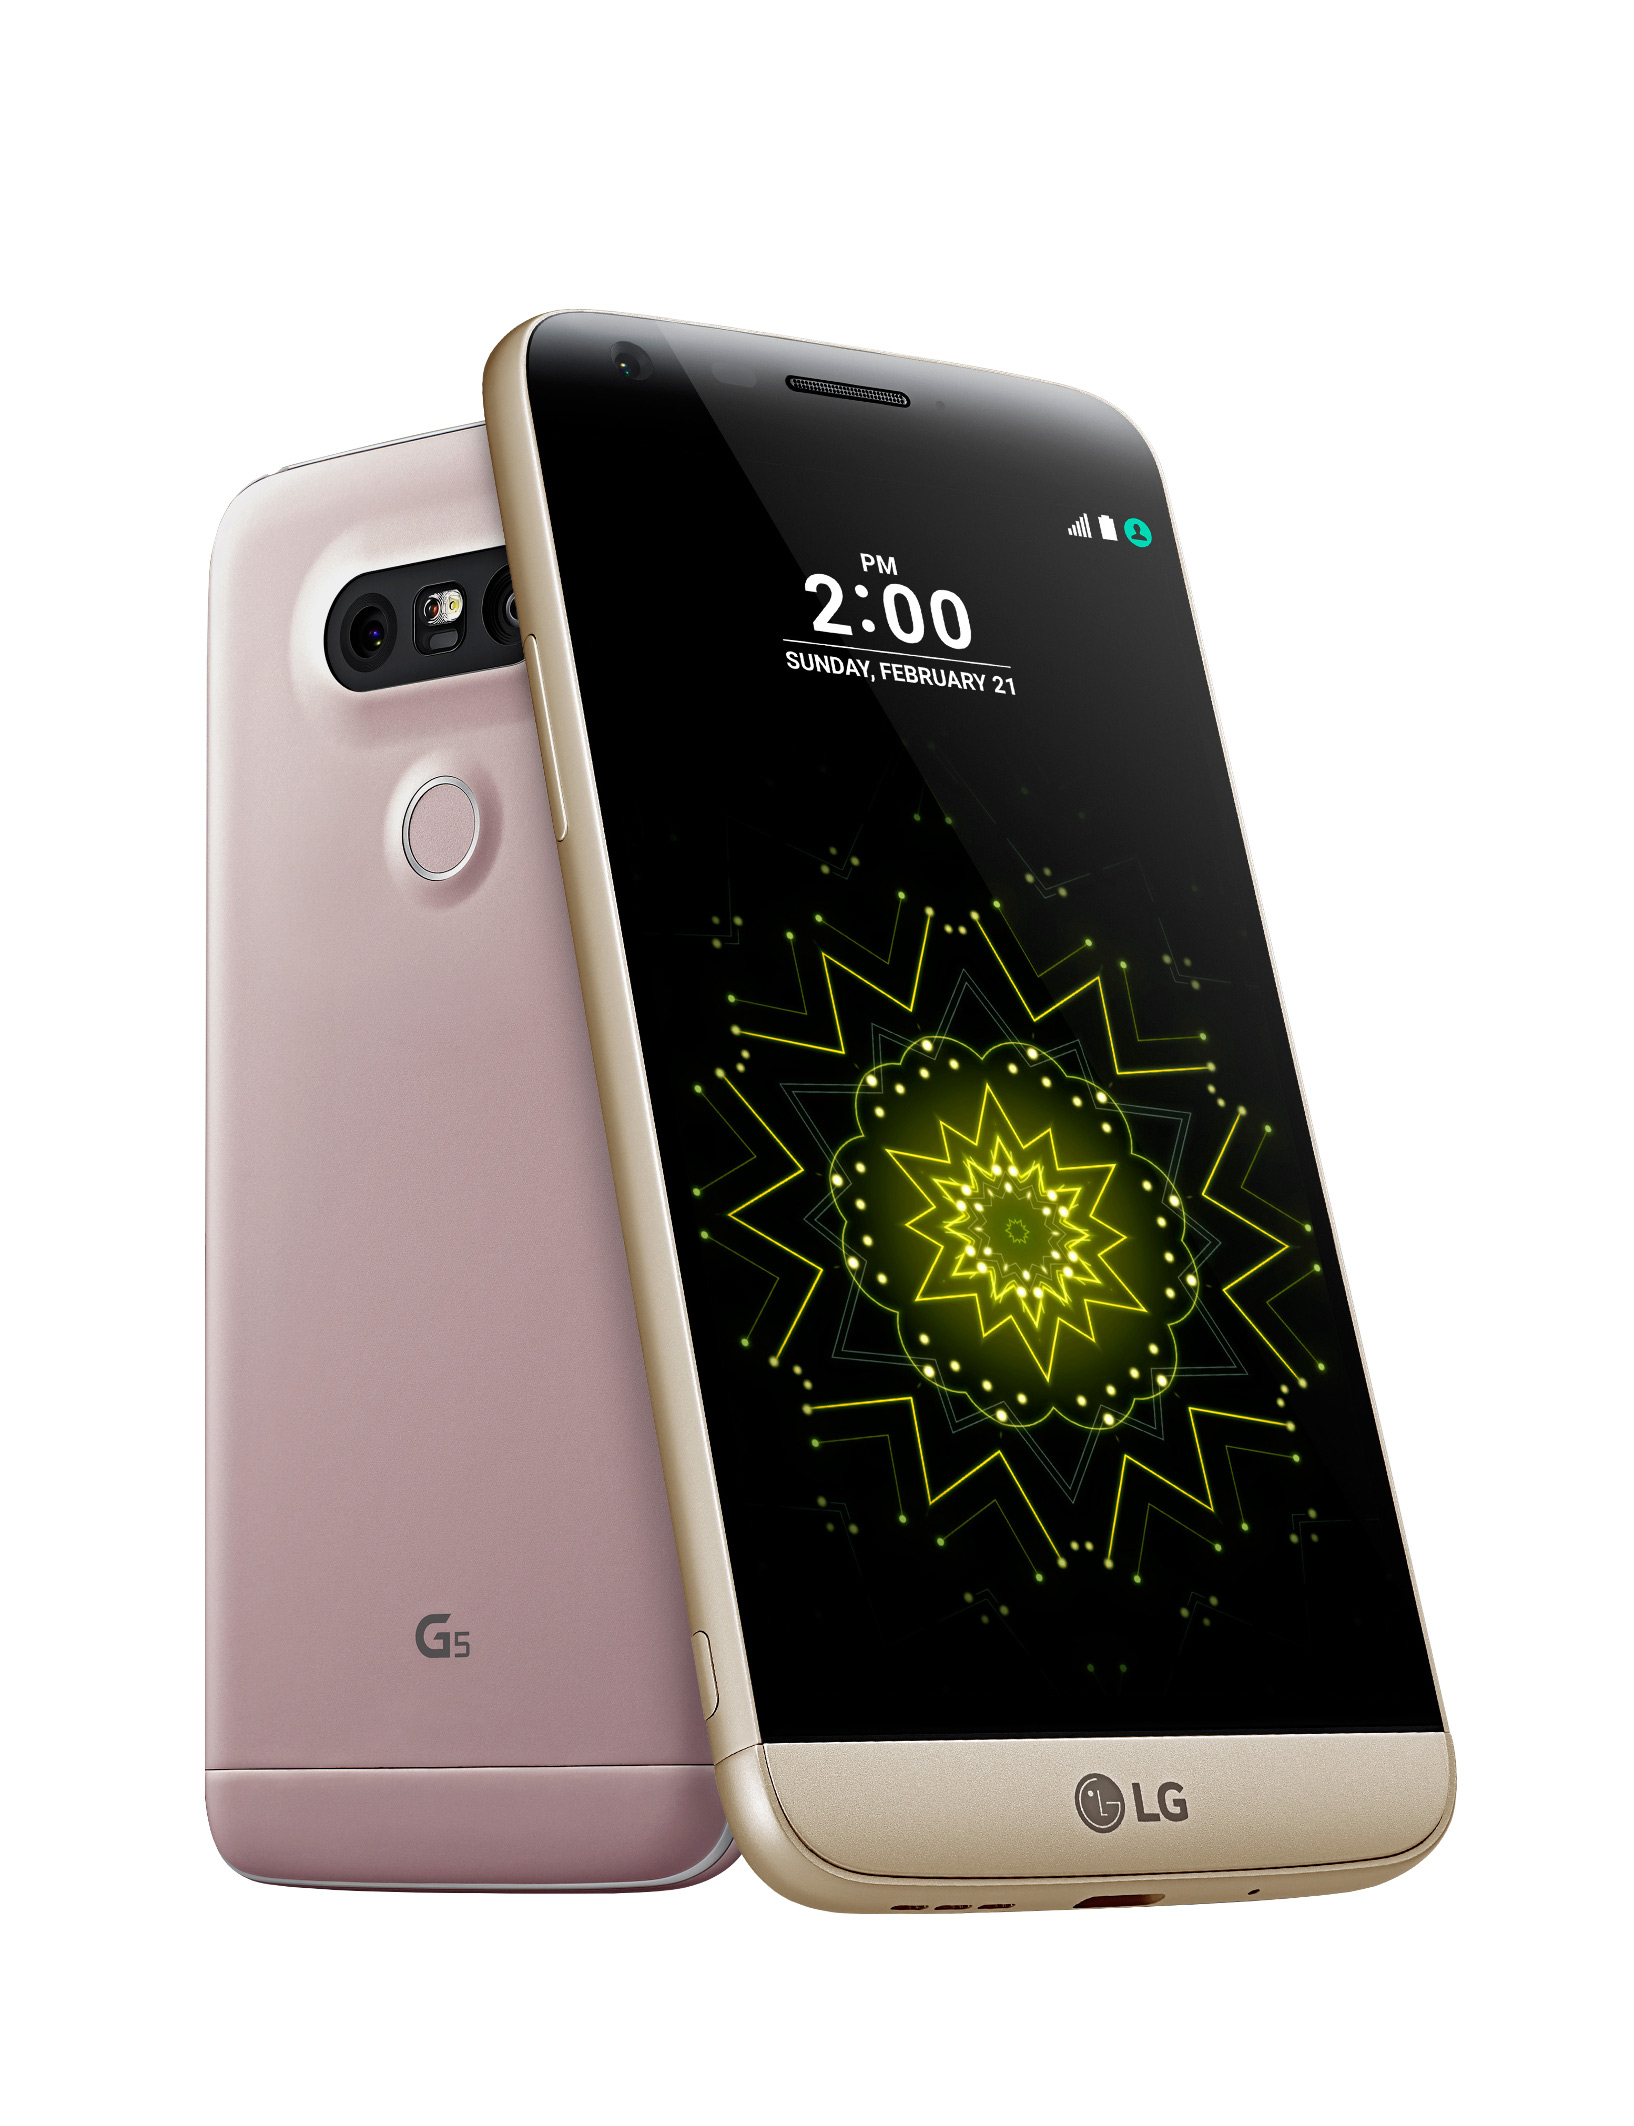 LG G5 launch day sales are impressive - NotebookCheck.net News